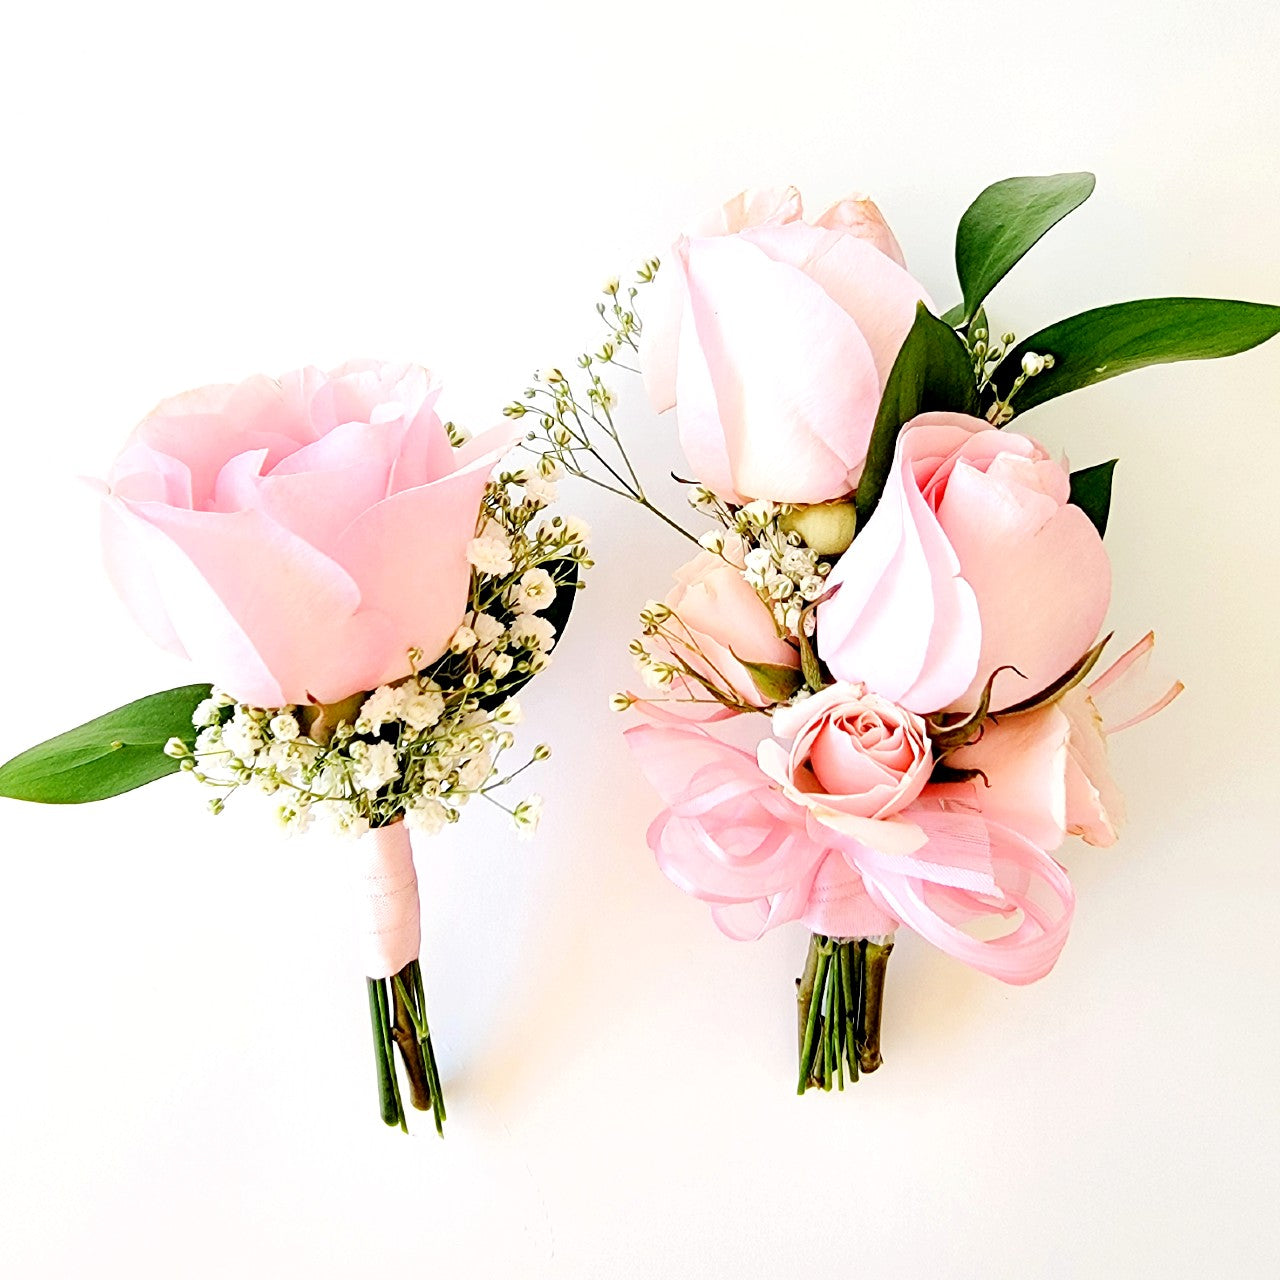 Rose on Hydro Corsage/Wristlet in Lapoint, UT - WEDDINGS & INTERIORS +  FLORAL BY JE DESIGN